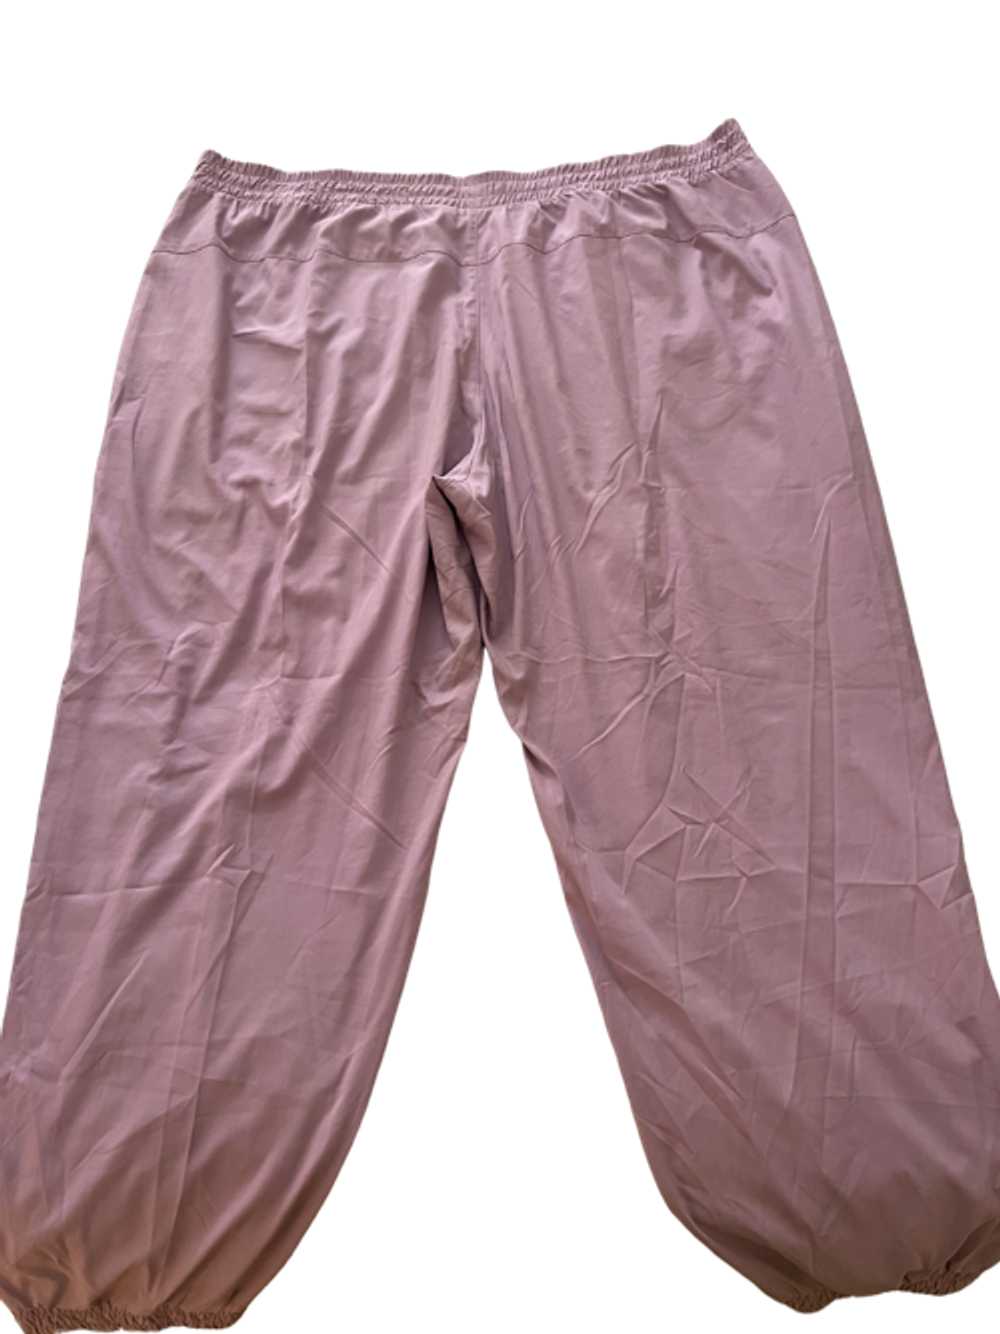 Girlfriend Collective Lilac Summit Track Pant - image 3